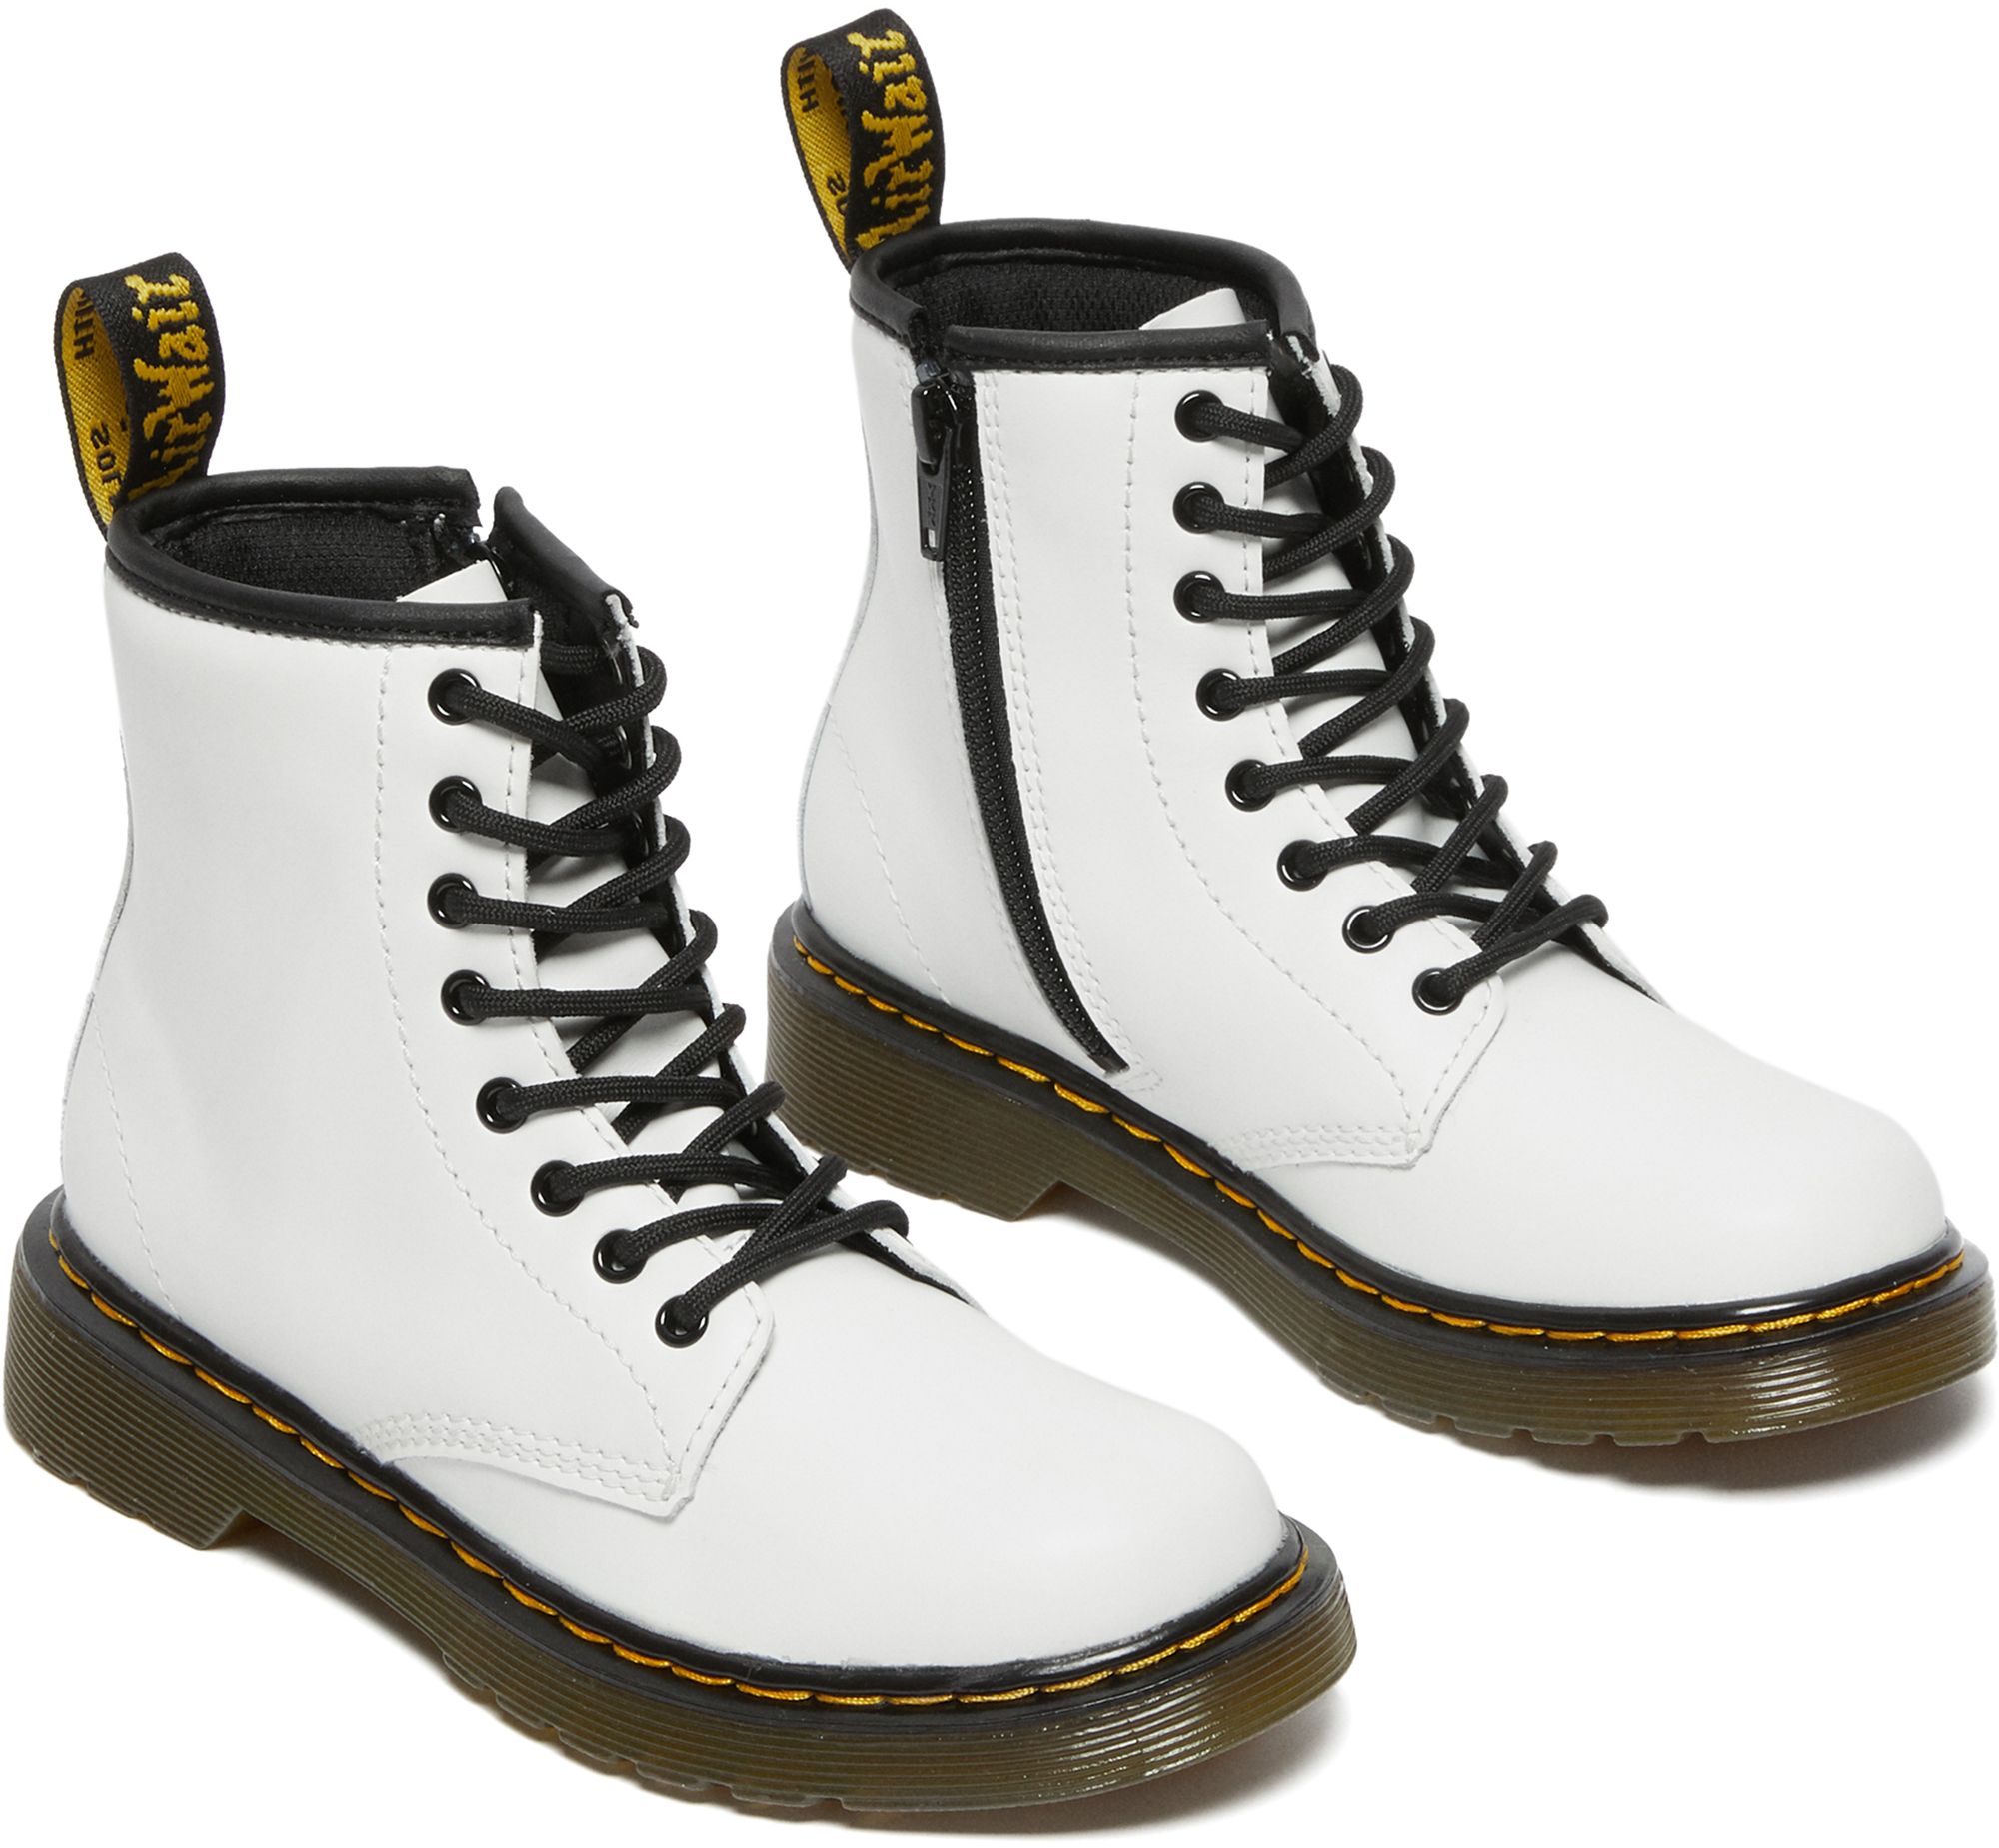 Dr. Martens Kids' 1460 Romario Leather Boots